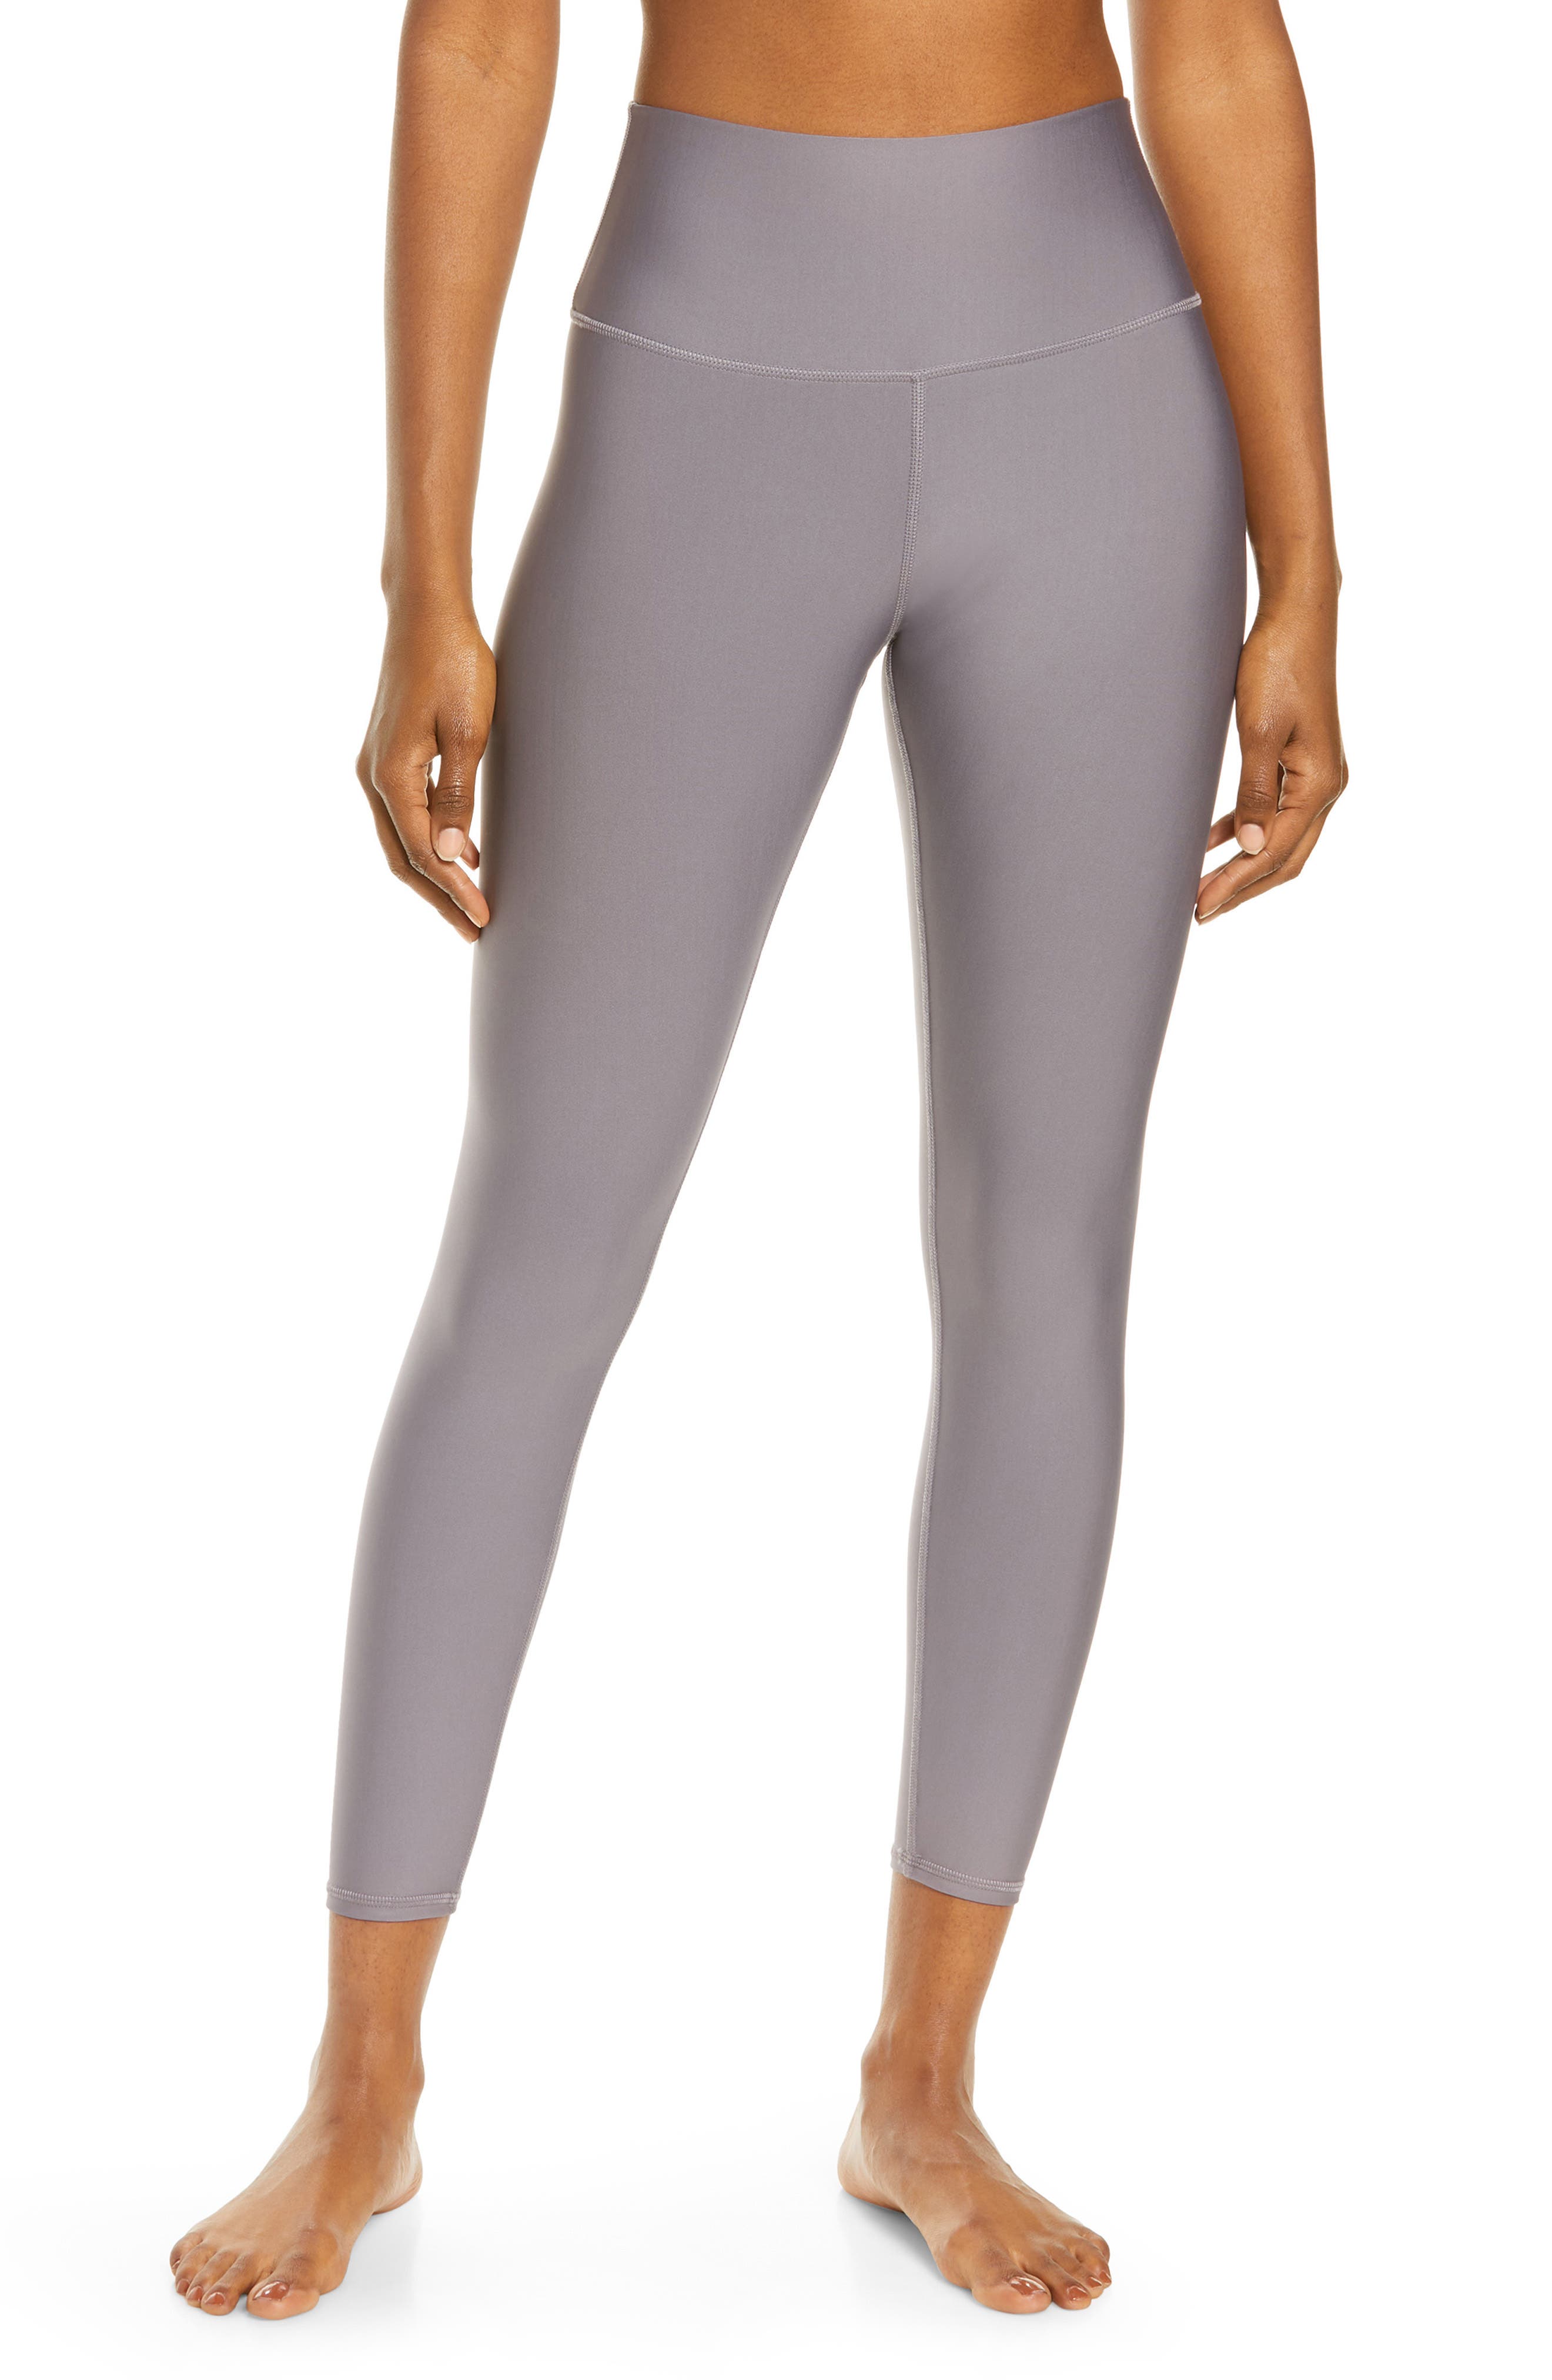 High-Waist Airlift Short in Pink Lavender by Alo Yoga - Work Well Daily